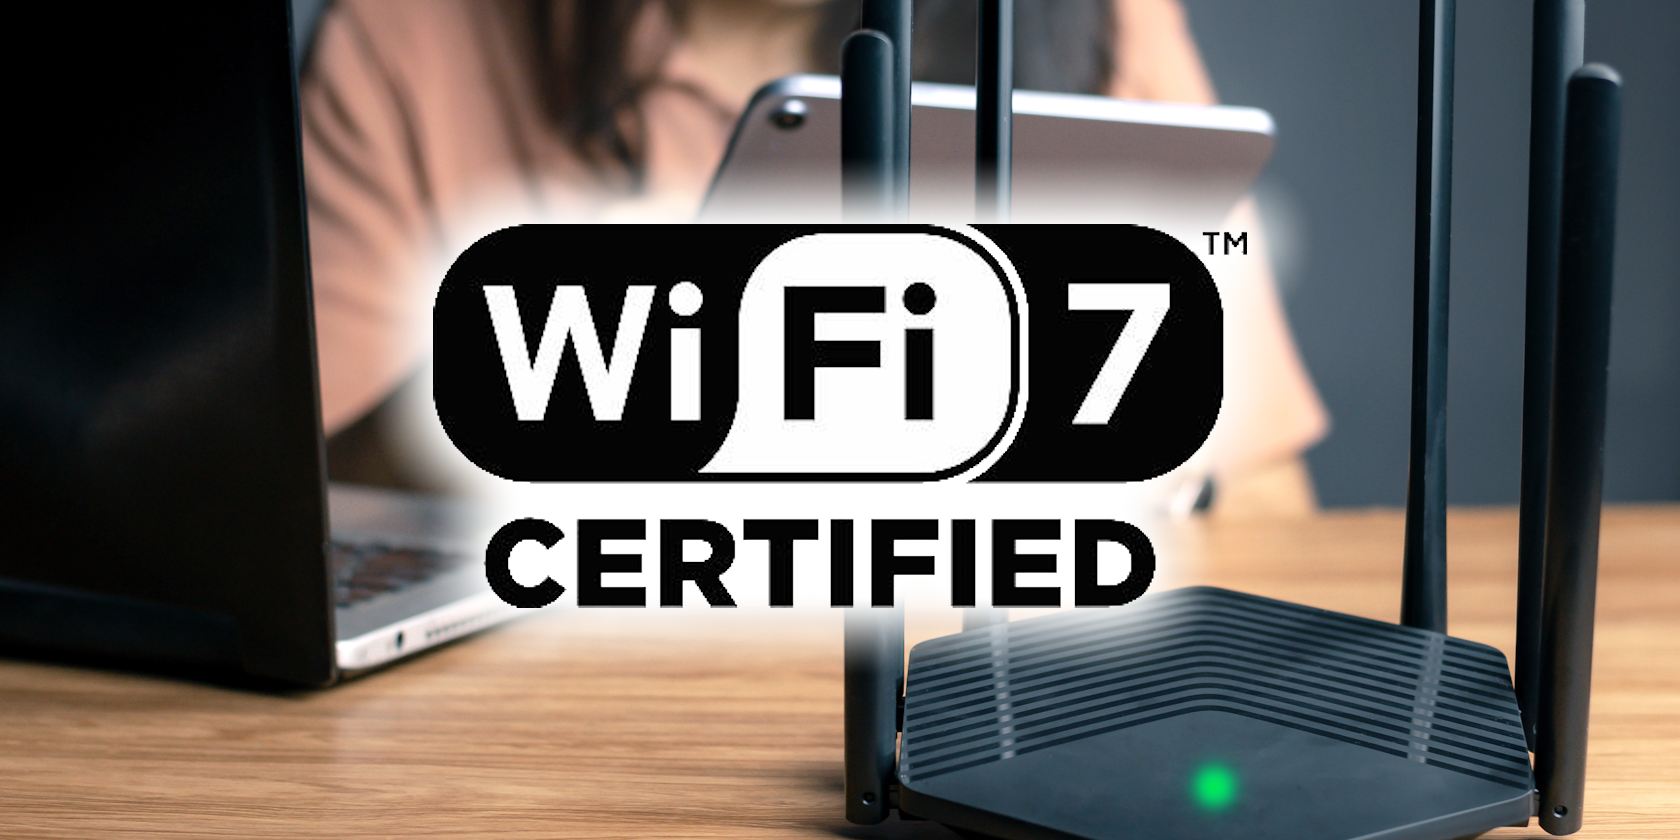 wifi 7 certified logo on router background